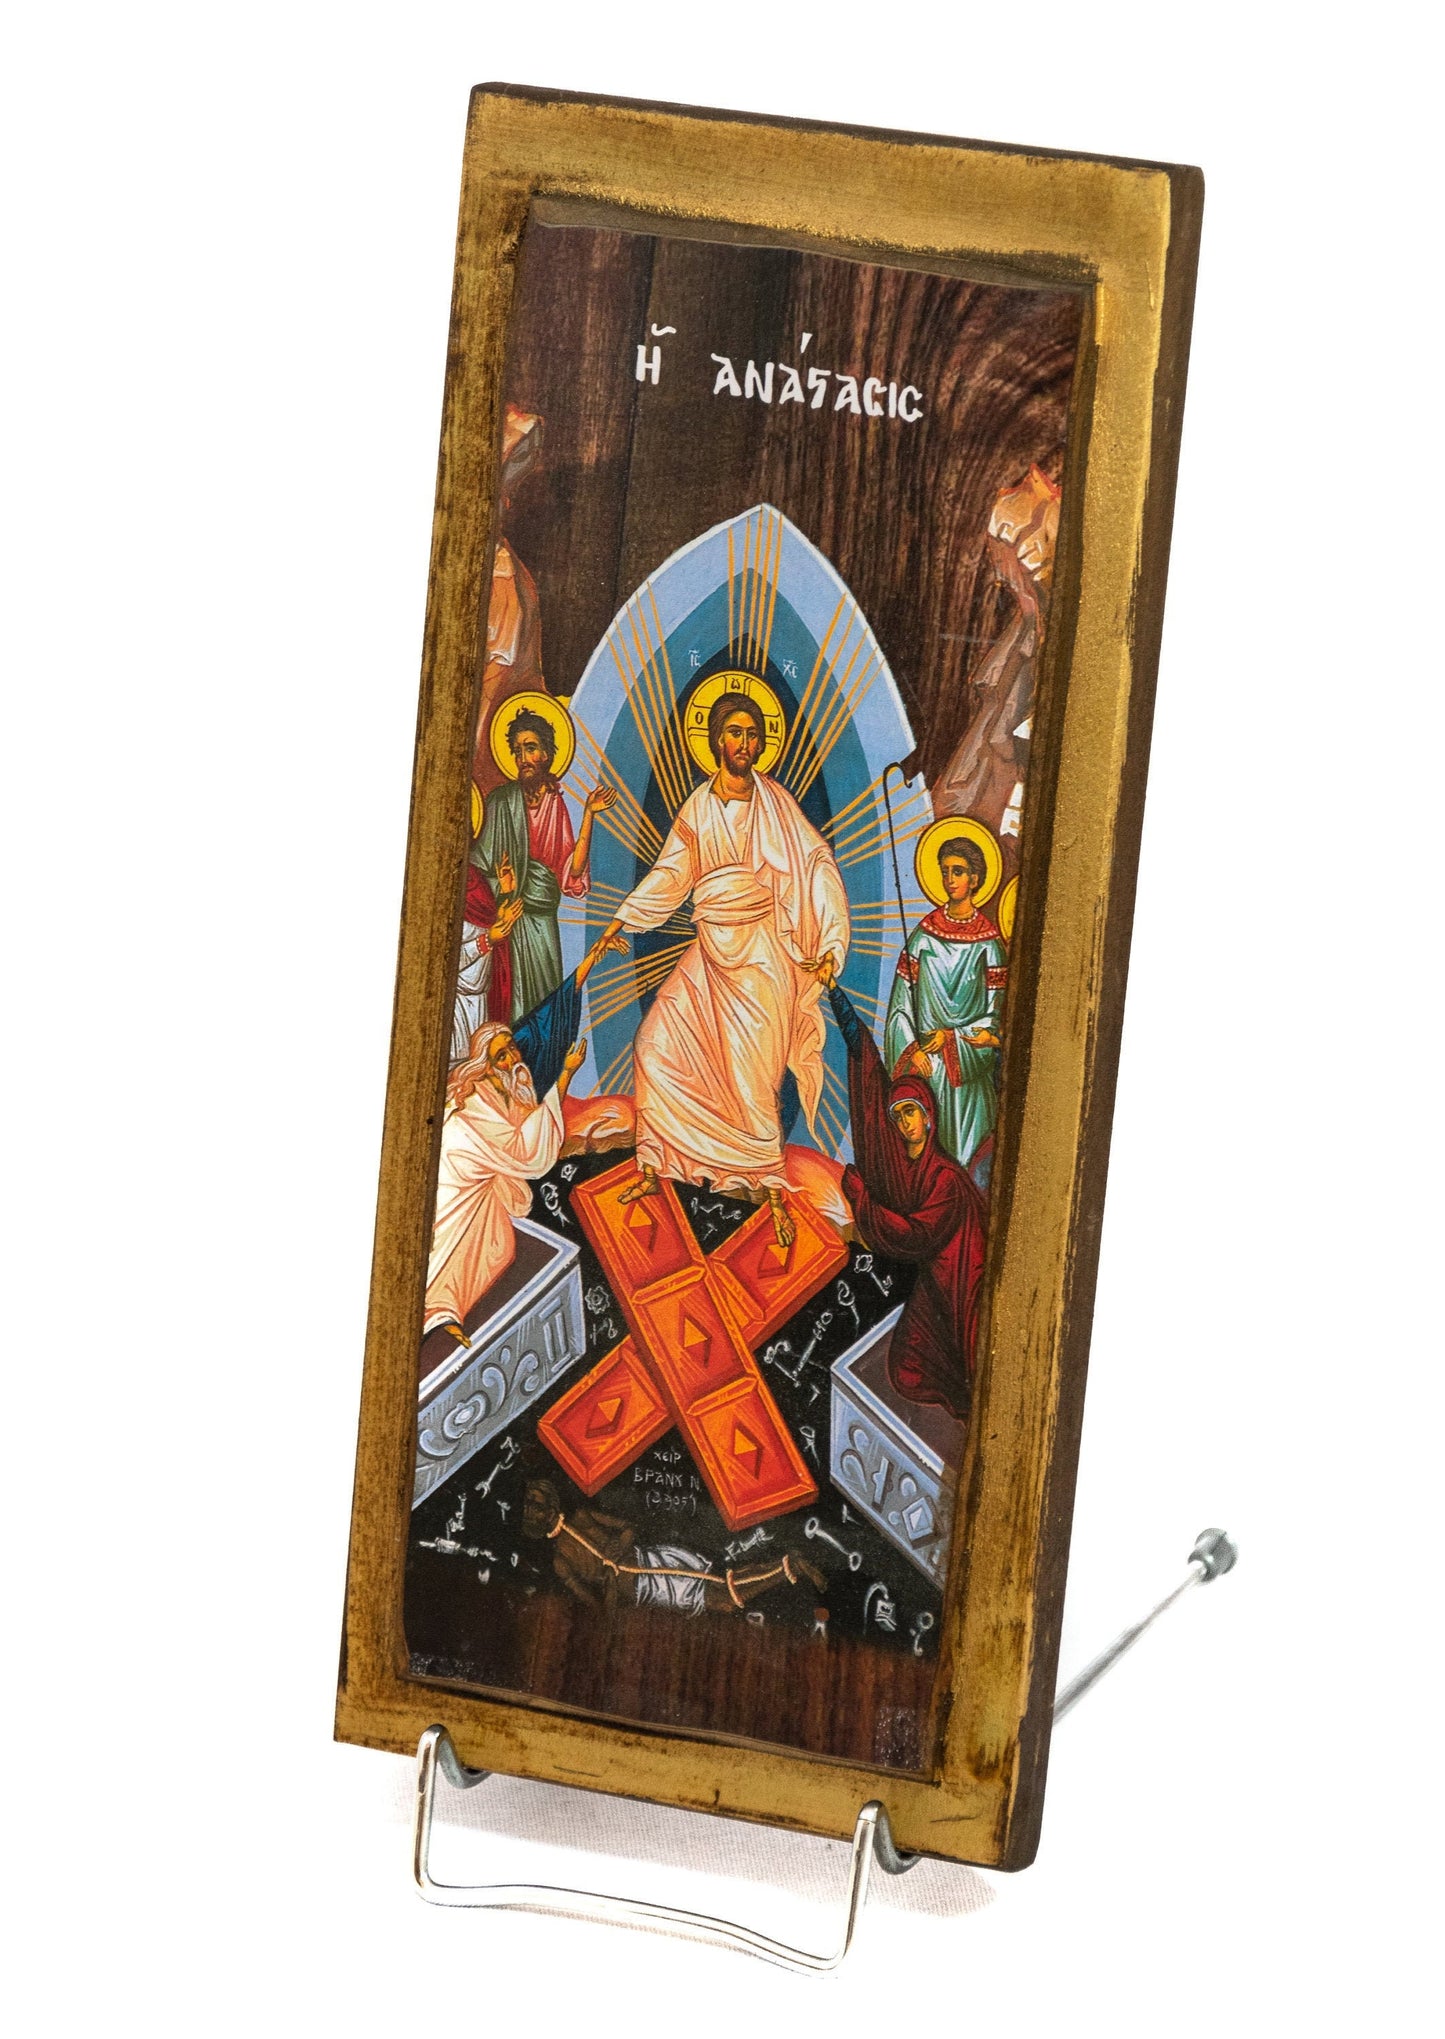 Resurrection Jesus Christ icon, Handmade Greek Orthodox icon, Byzantine art wall hanging wood plaque of our Lord rising from the dead, gift TheHolyArt